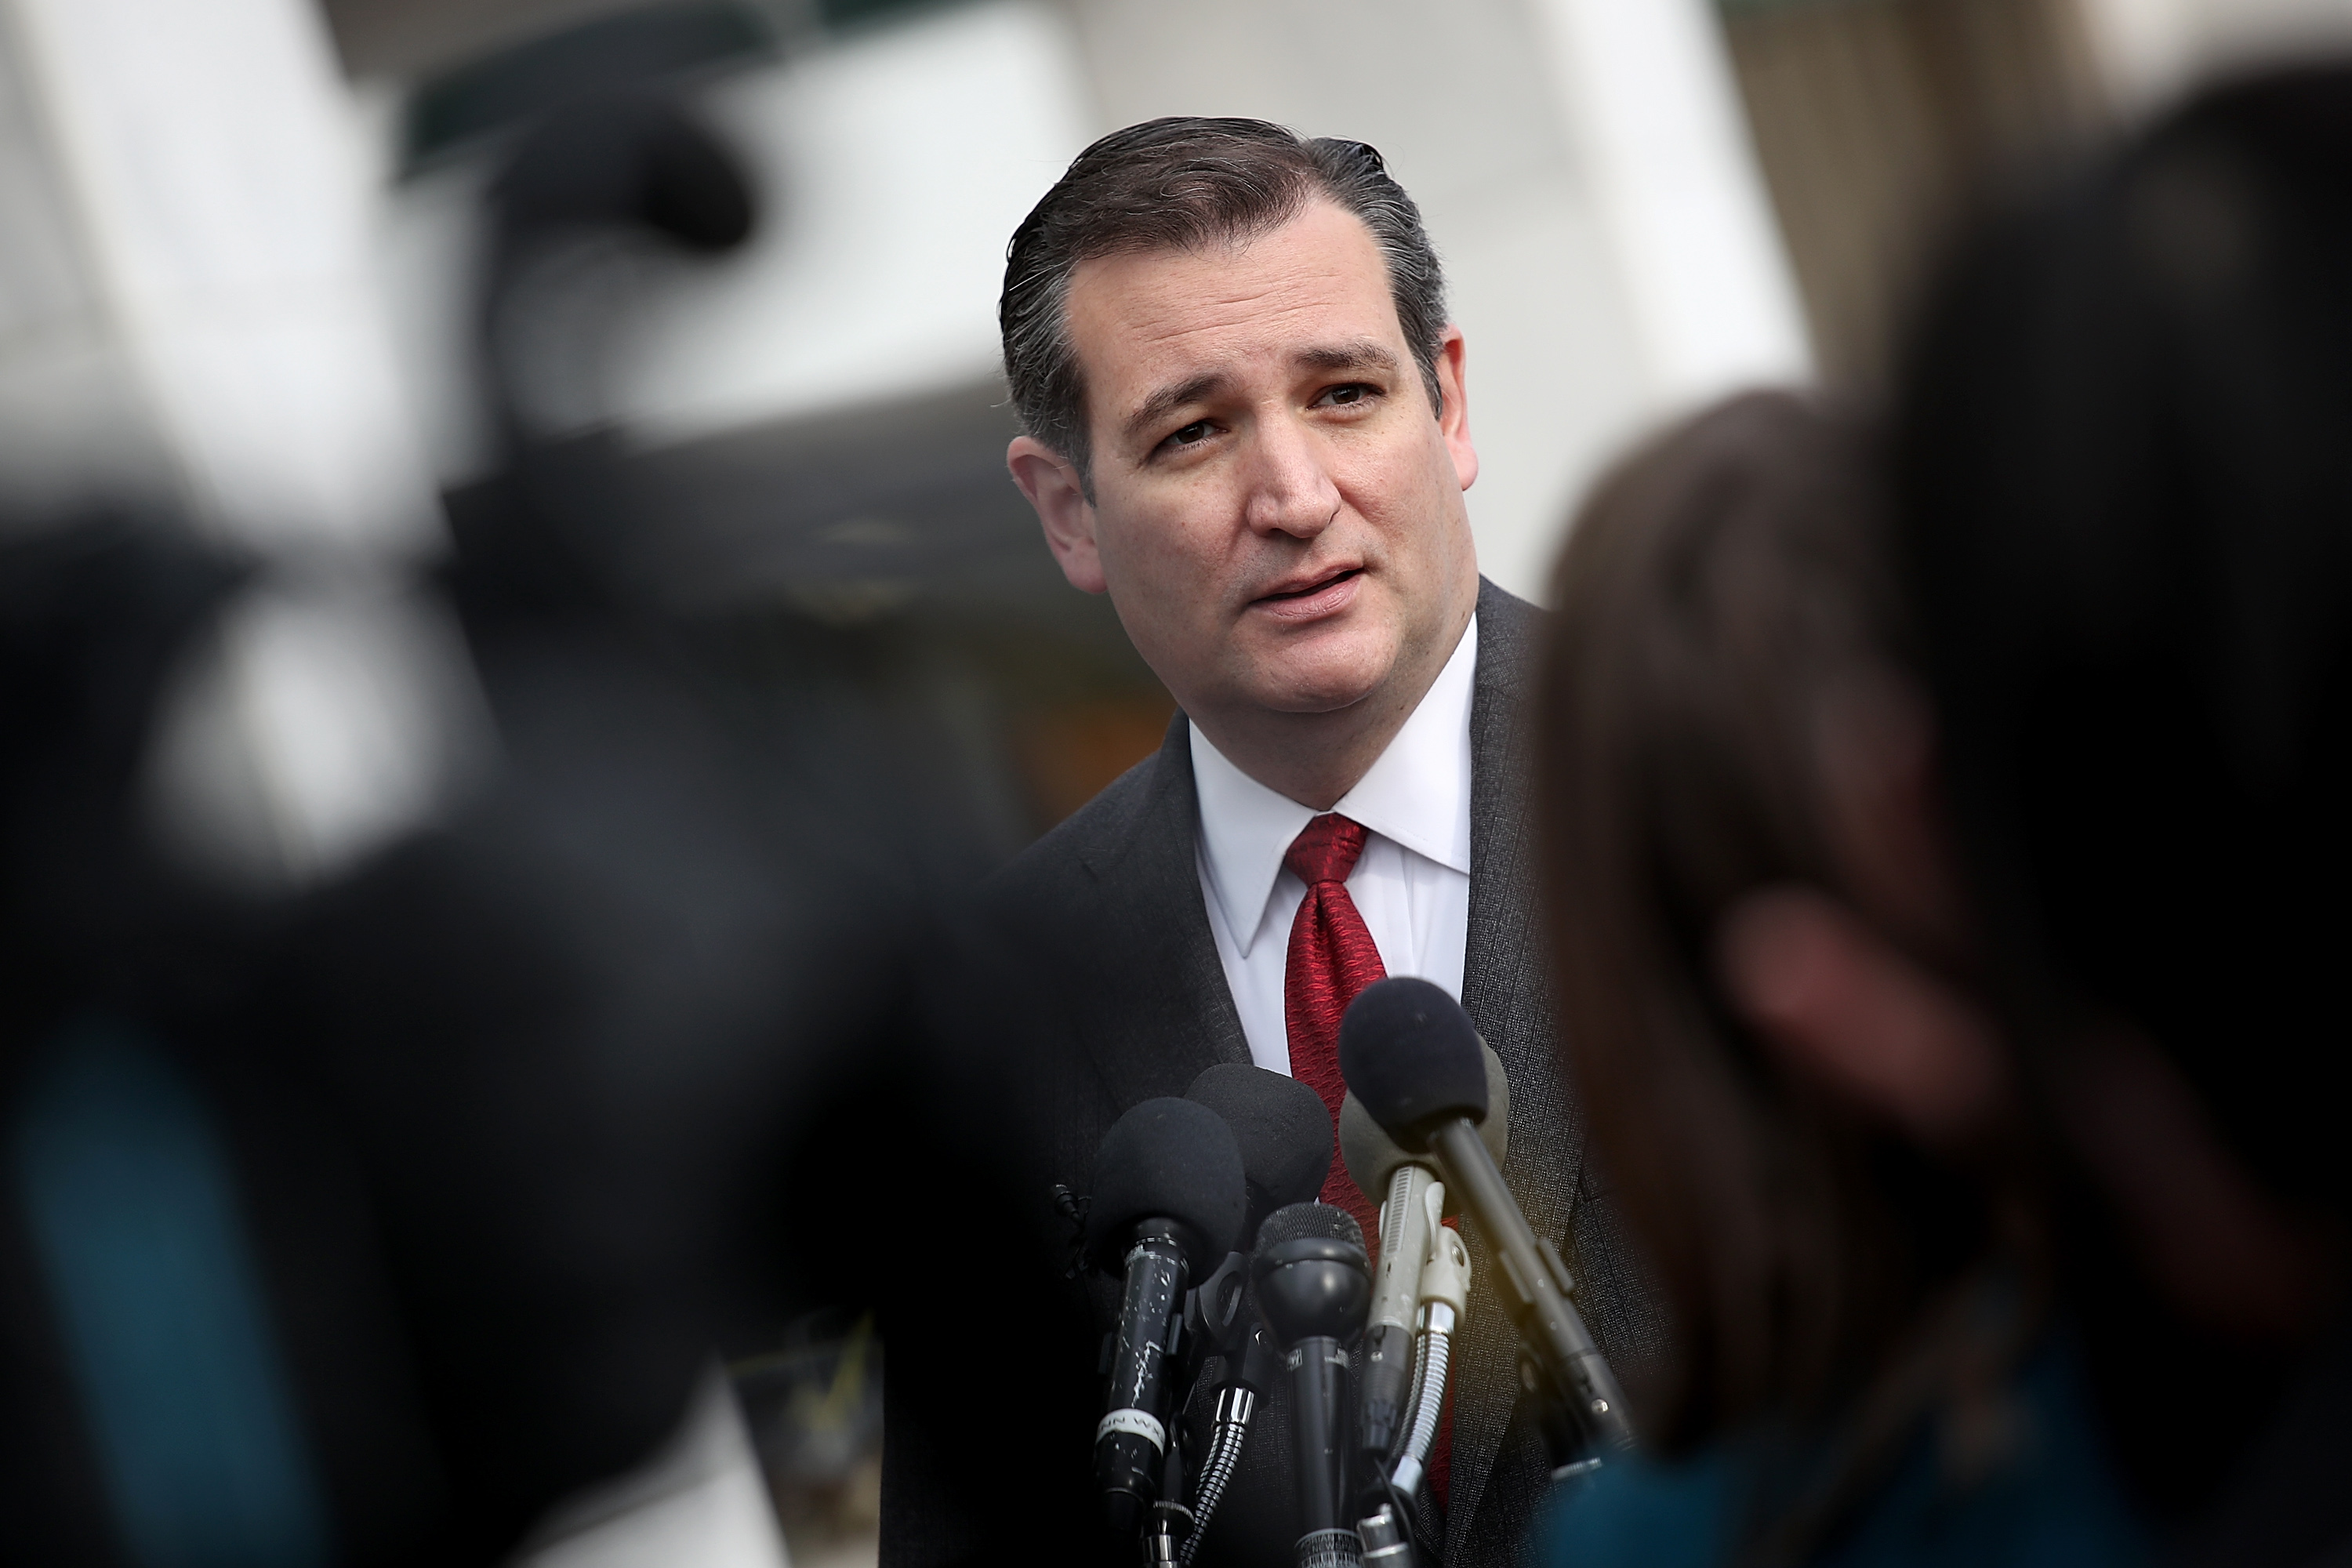 Republican presidential candidate Sen. Ted Cruz (R-TX) addresses the bombings in Brussels during remarks in Washington, D.C., on March 22, 2016.